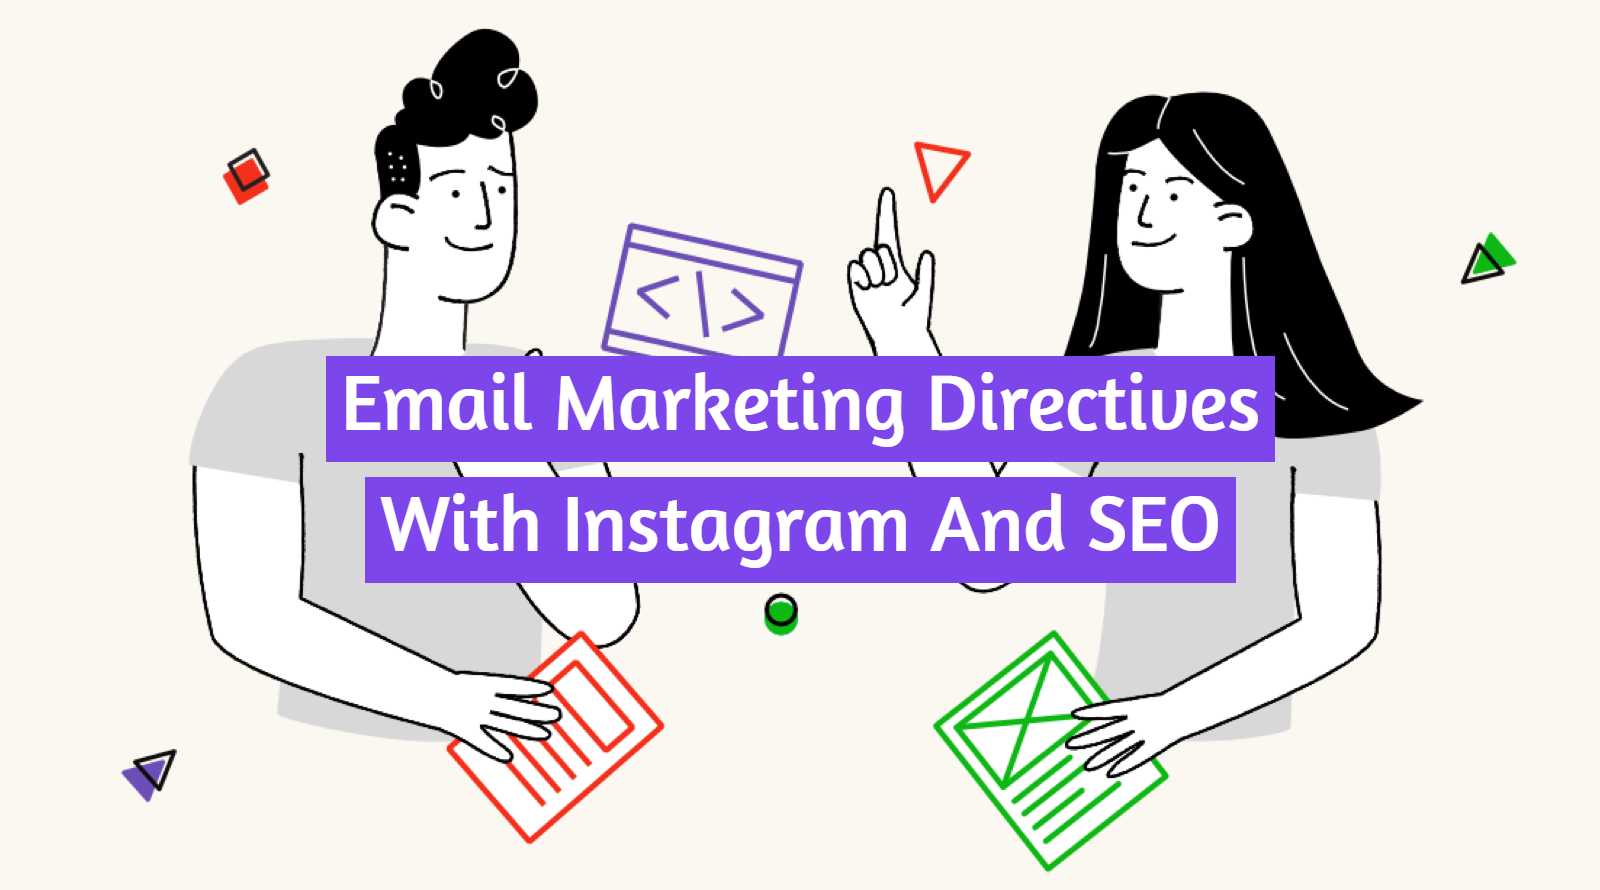 Syncing Your Email Marketing Directives With Instagram And SEO To Drive Sales